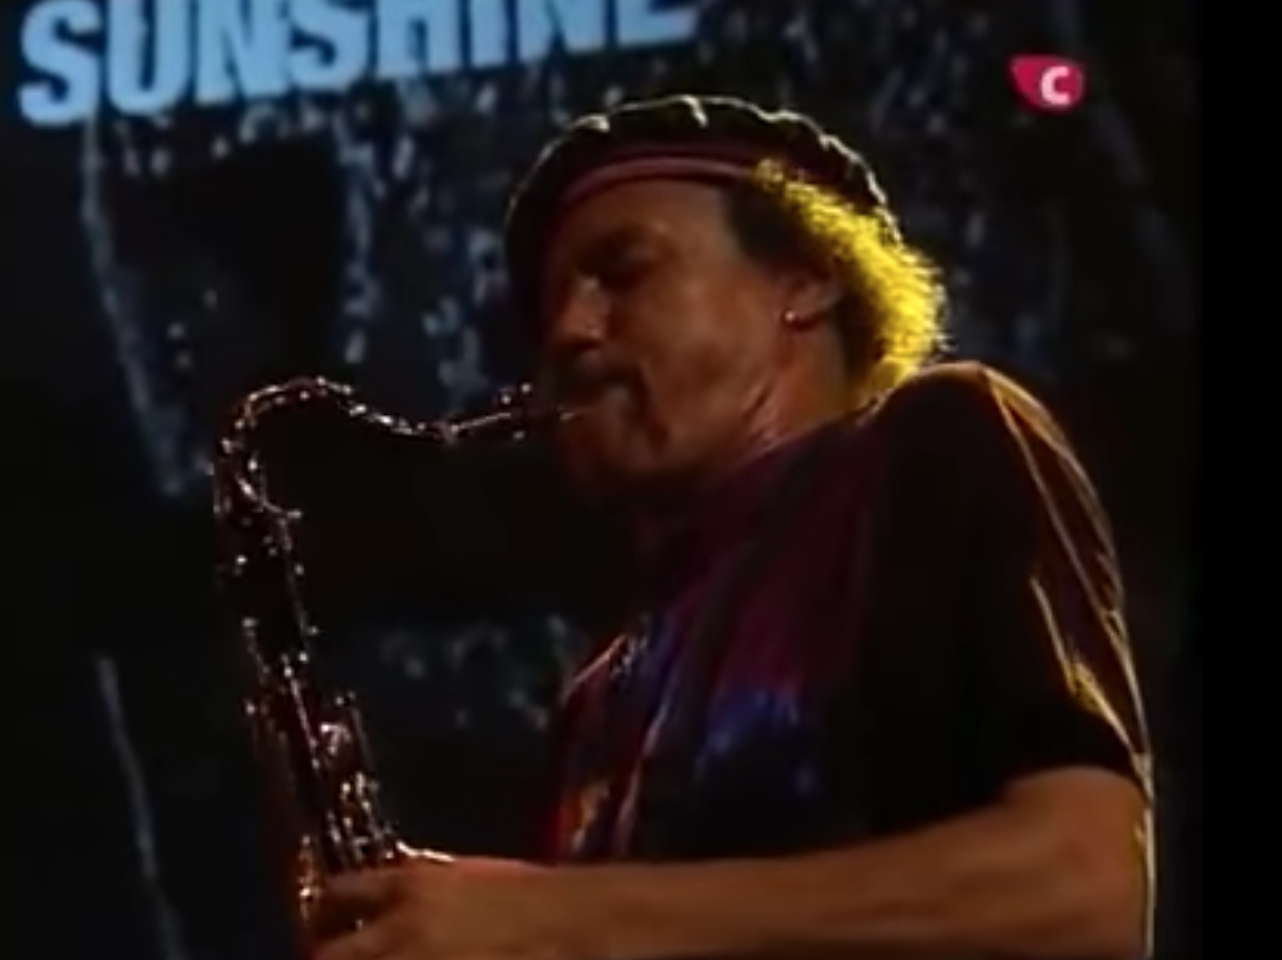 Charles Neville playing Ain’t No Sunshine